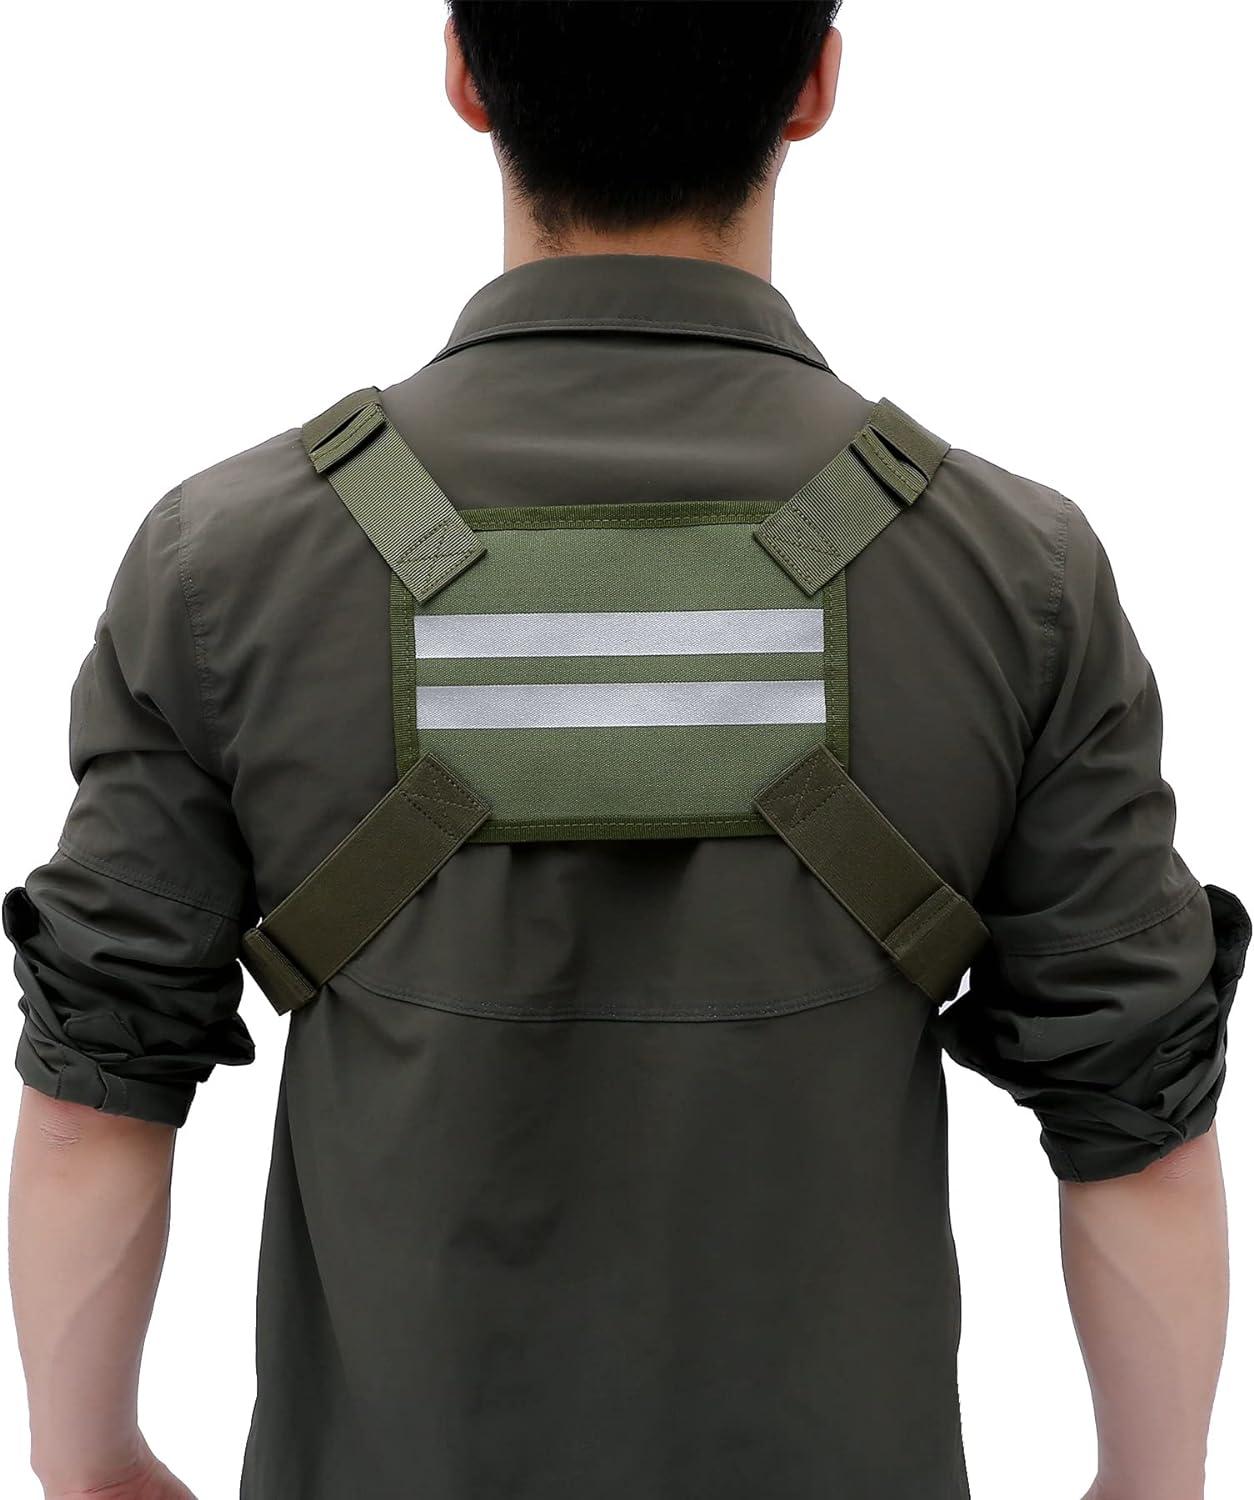 Muserise Outdoor Sports Utility Chest Pack Tactical EDC Chest Bag